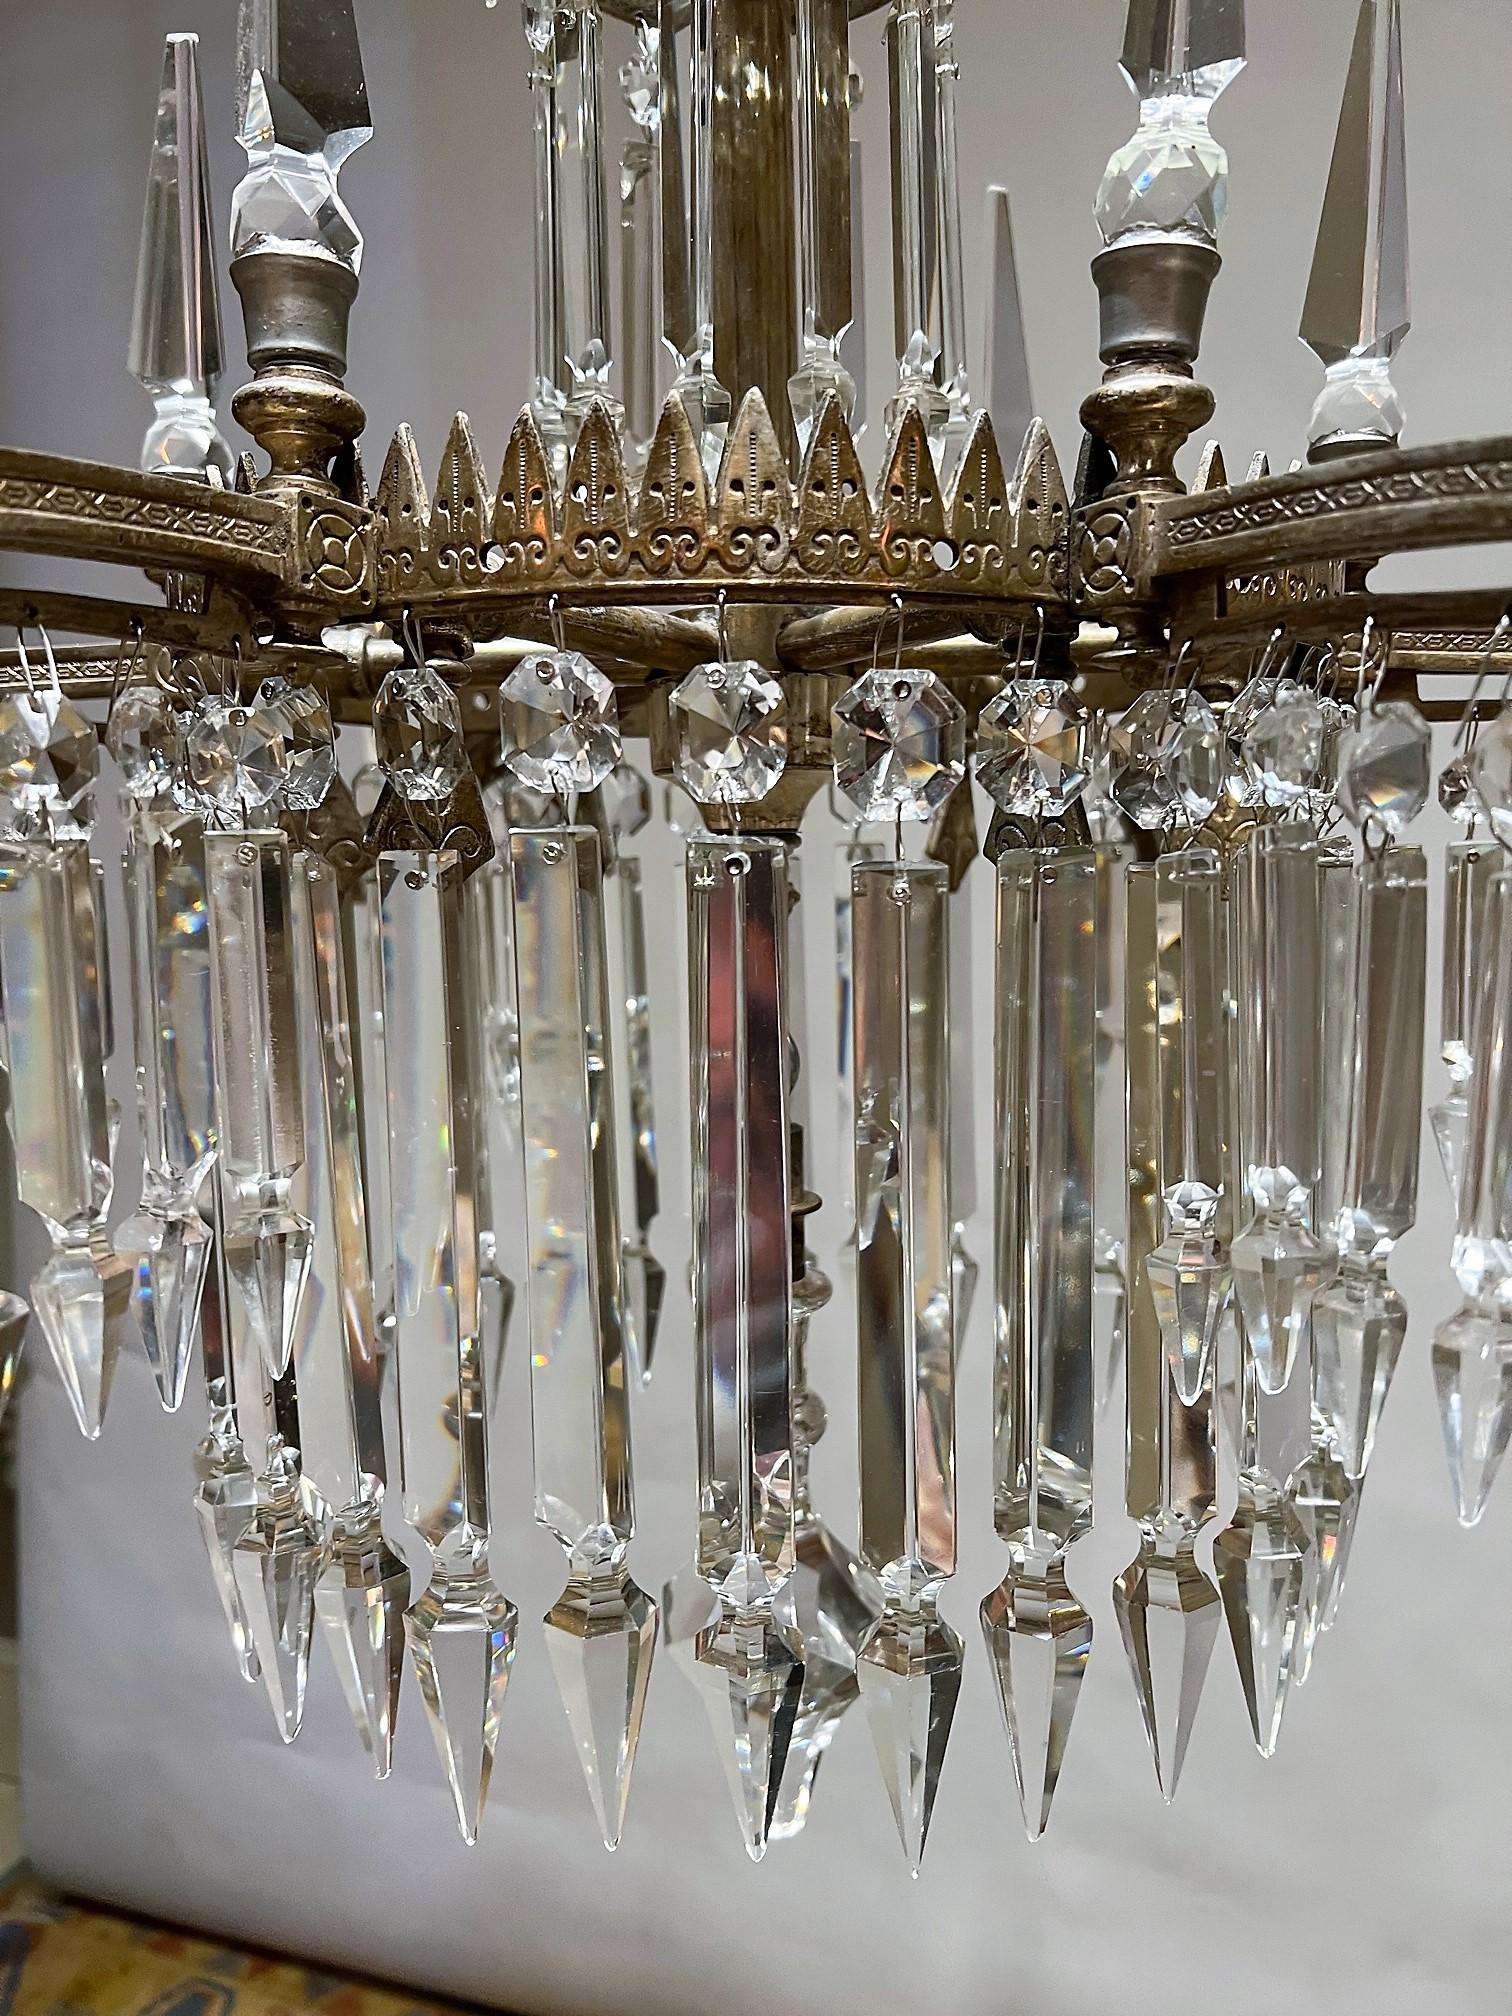 6-Light Silvered Bronze & Crystal Electrified Gasolier, America, Circa:1850 For Sale 5